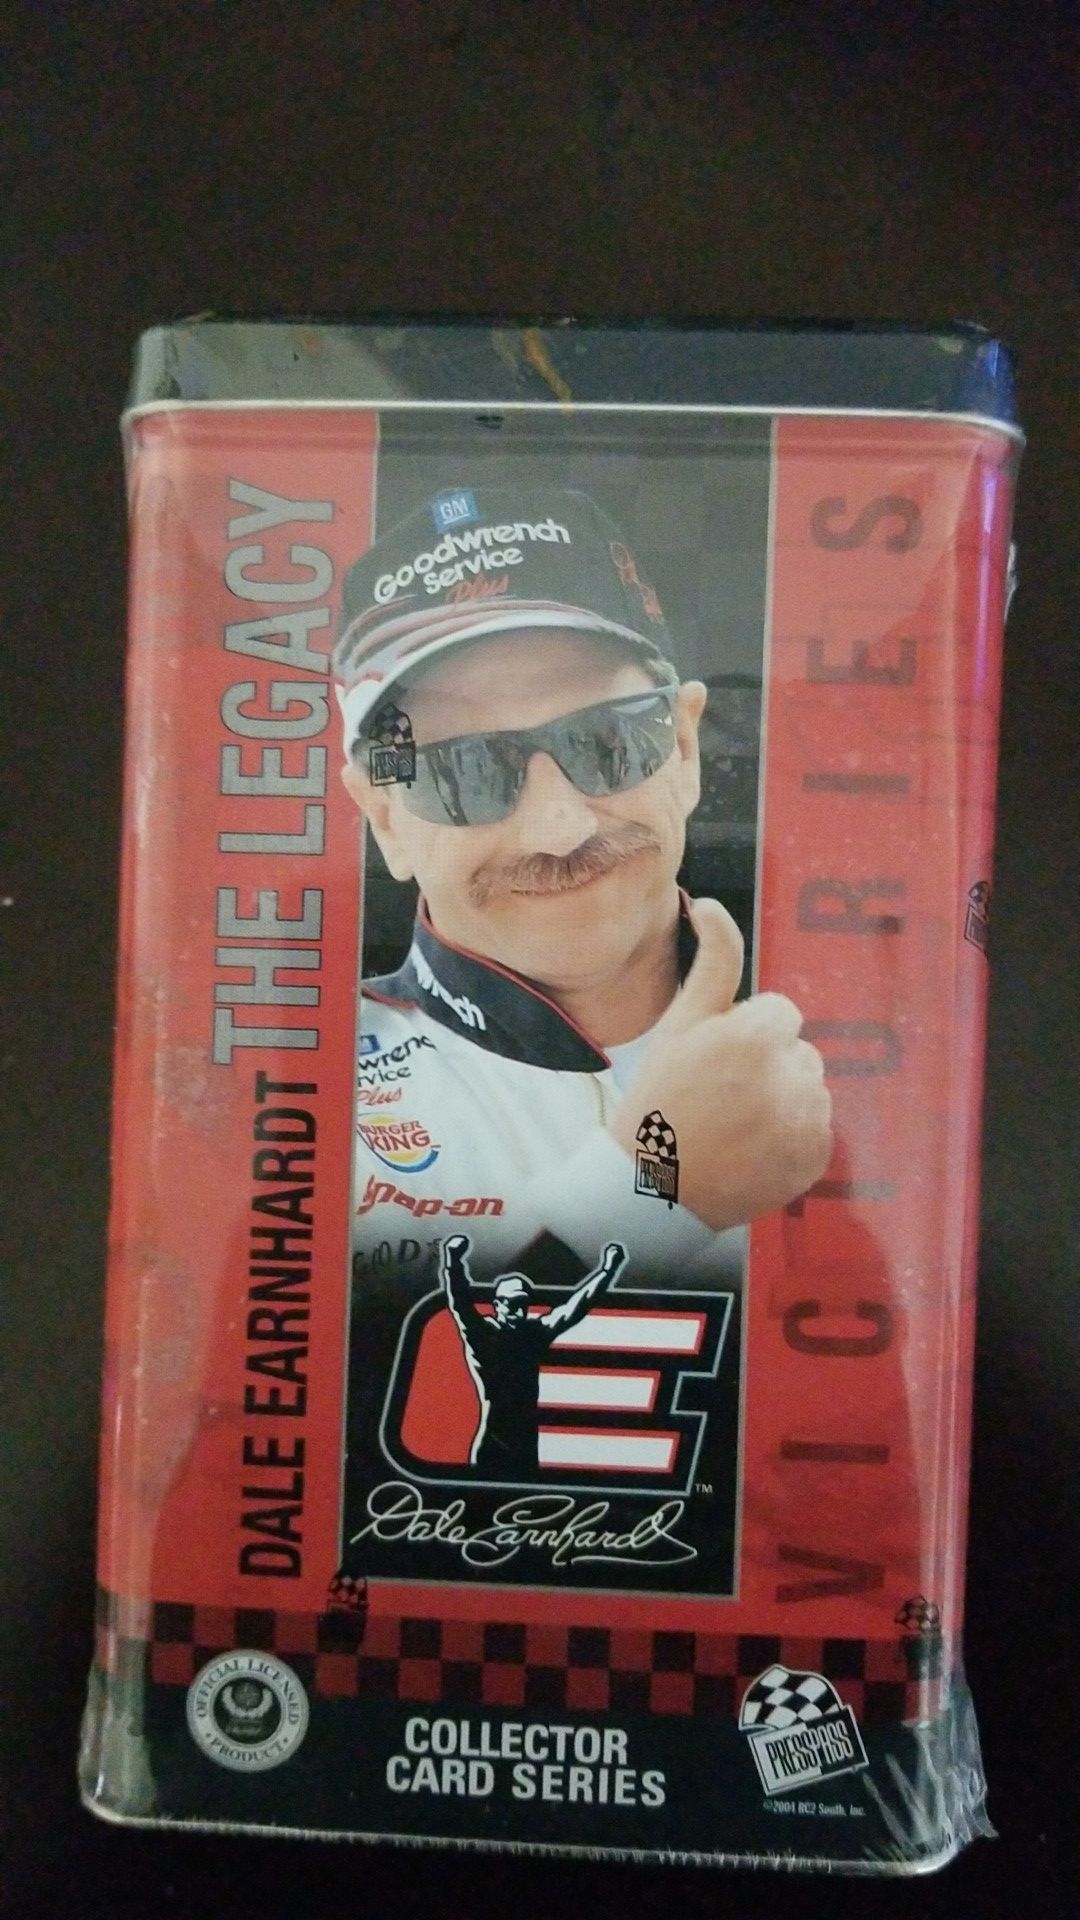 DALE EARNHARDT COLLECTOR CARD SERIES